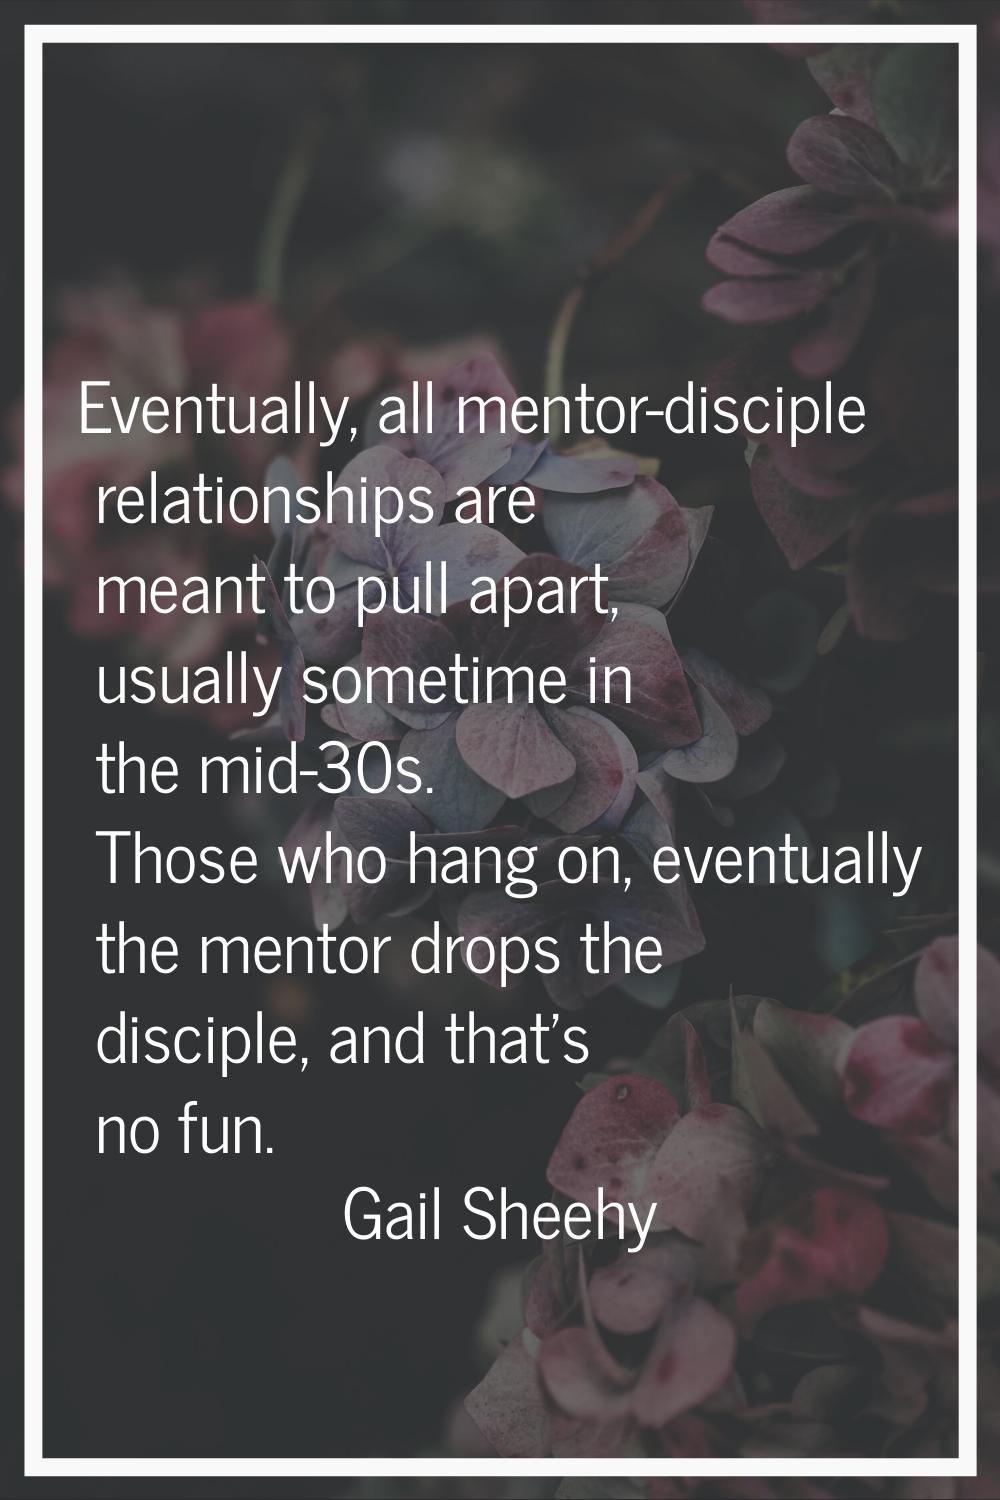 Eventually, all mentor-disciple relationships are meant to pull apart, usually sometime in the mid-